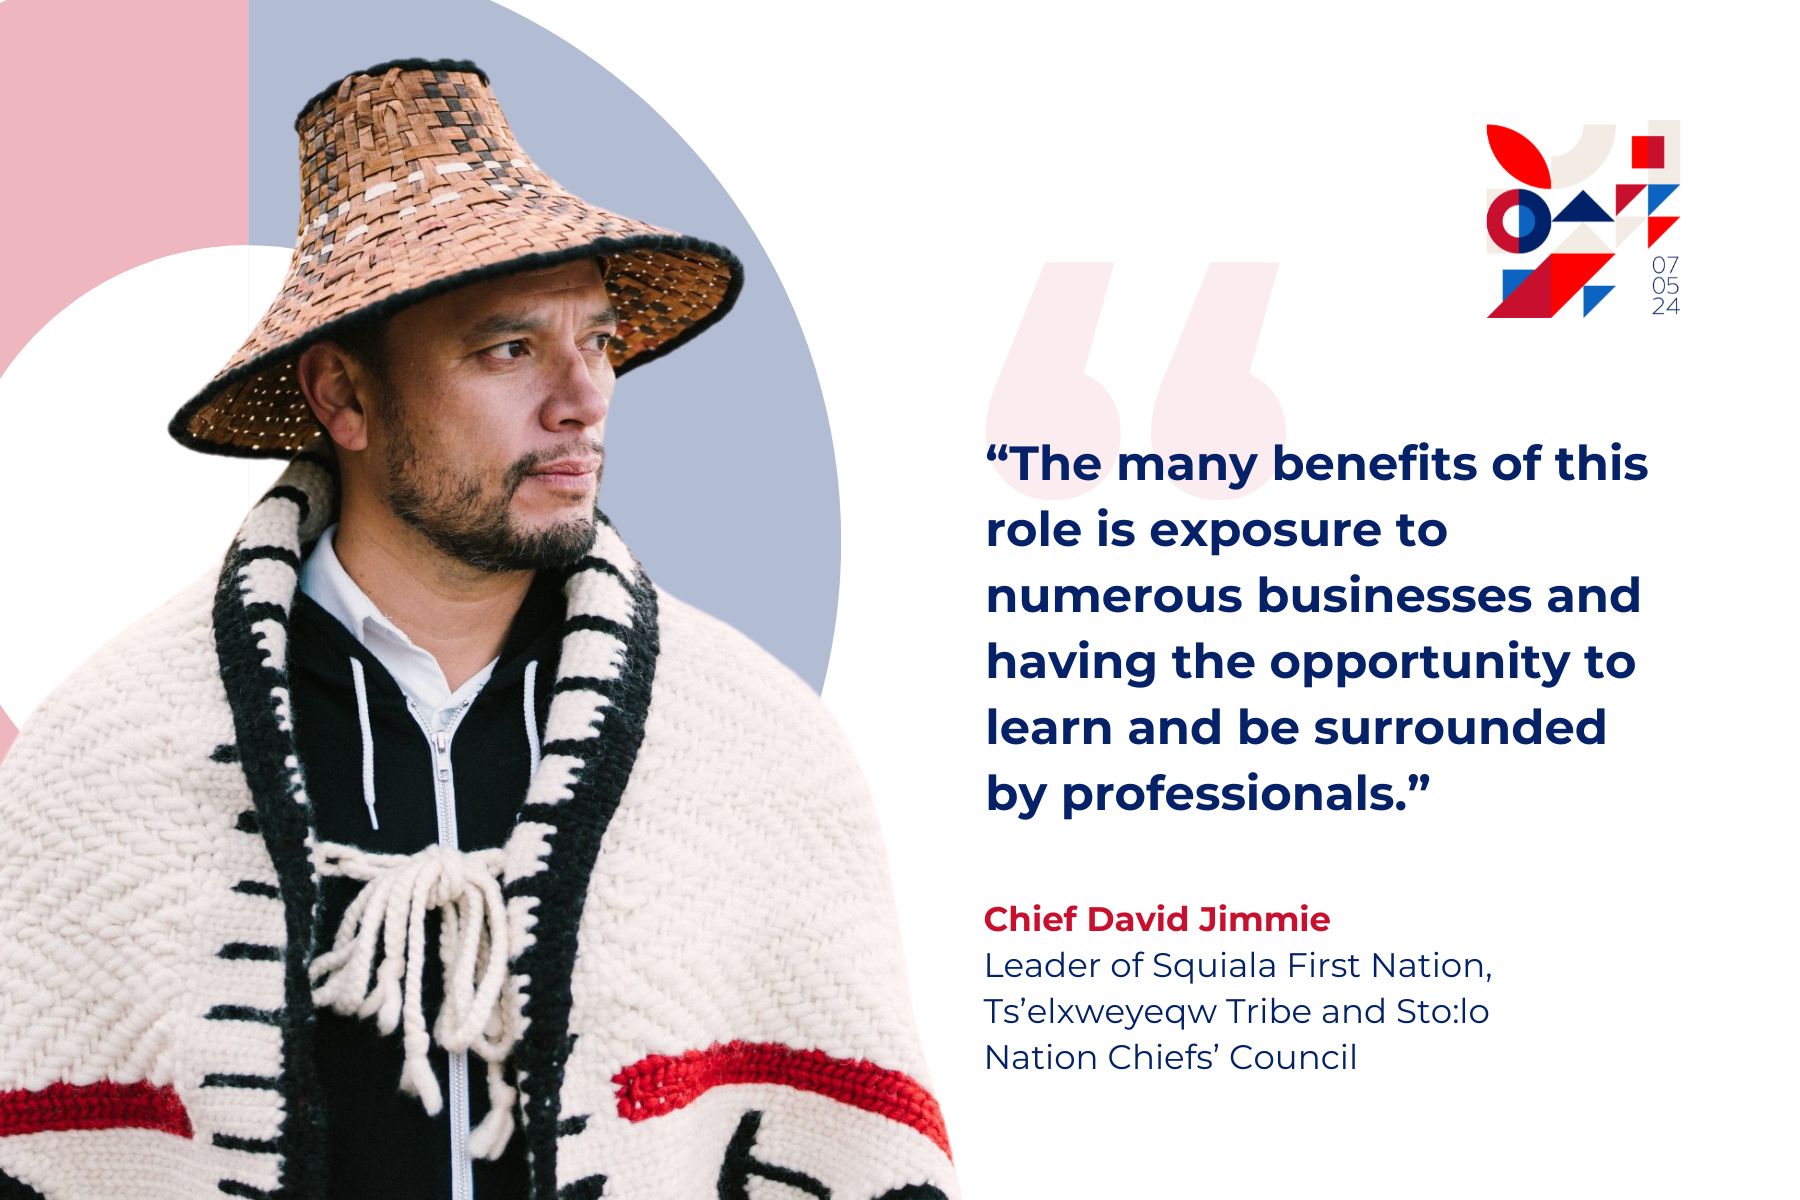 Chief David Jimmie's Perspective on Canada's Investment Potential